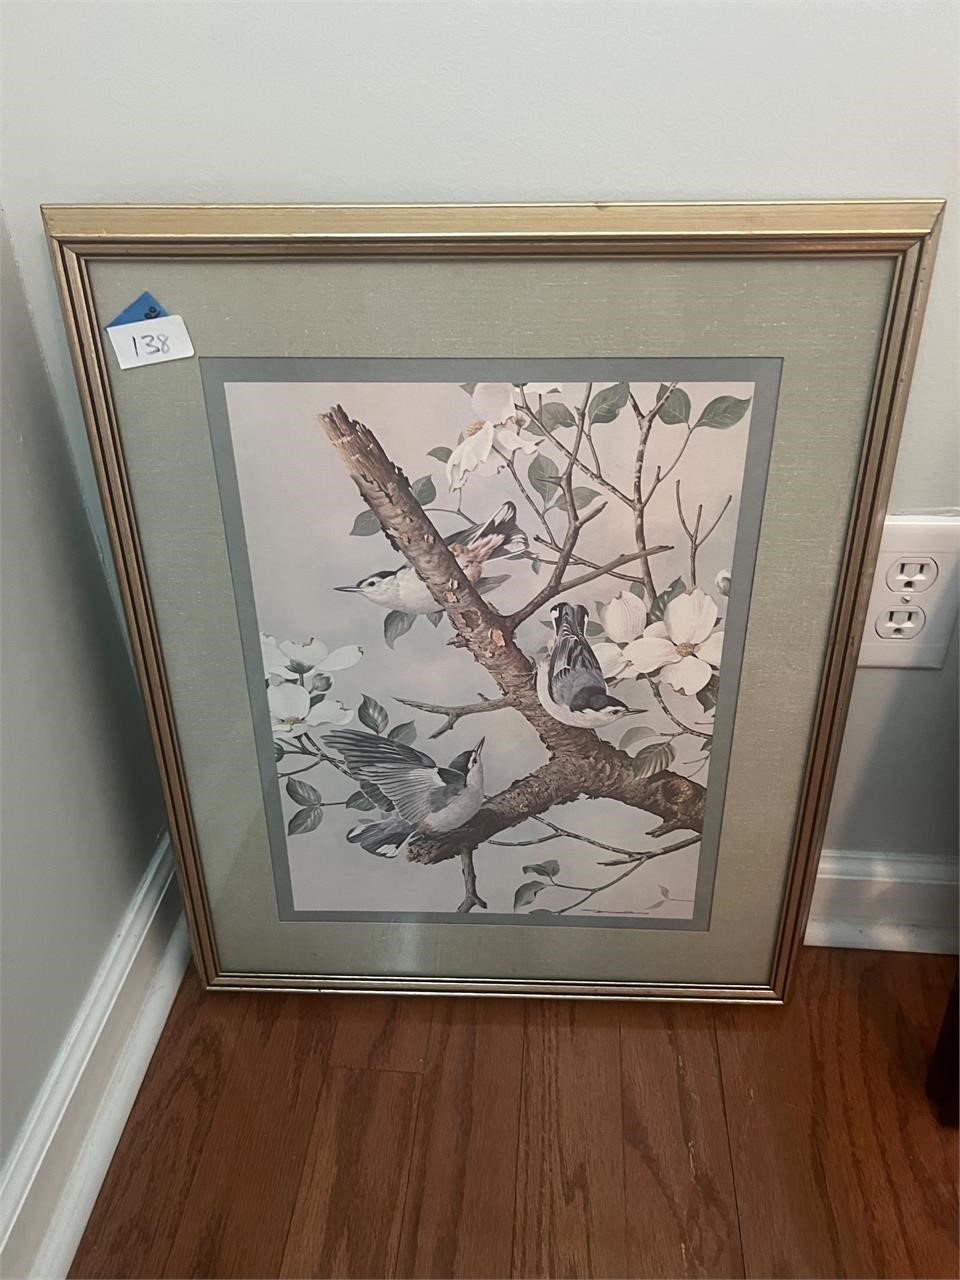 LARGE BIRD PAINTING IN FRAME